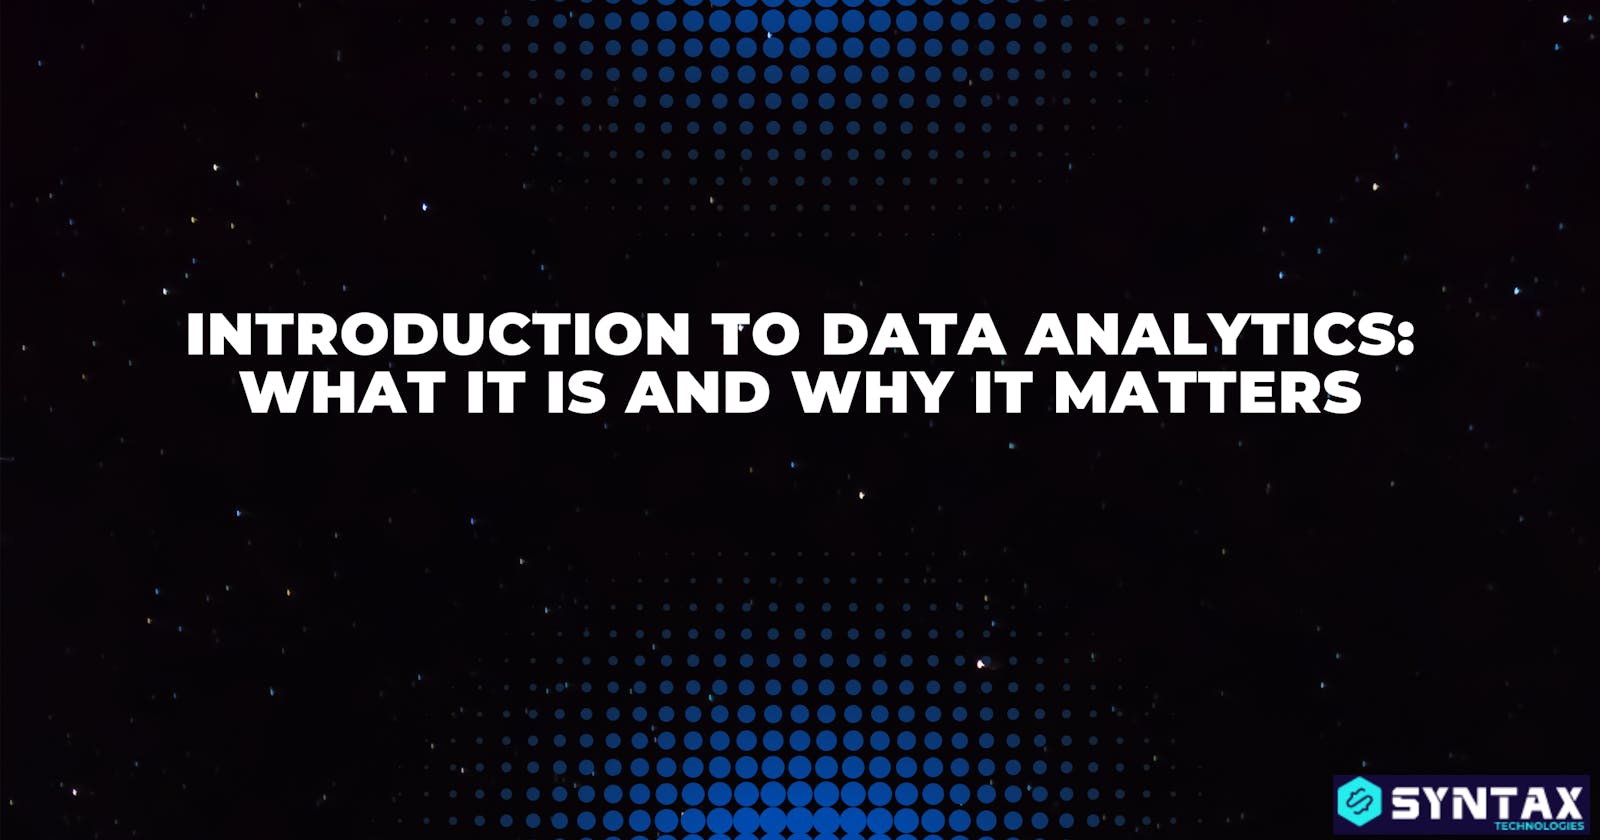 Introduction to Data Analytics: What It Is and Why It Matters